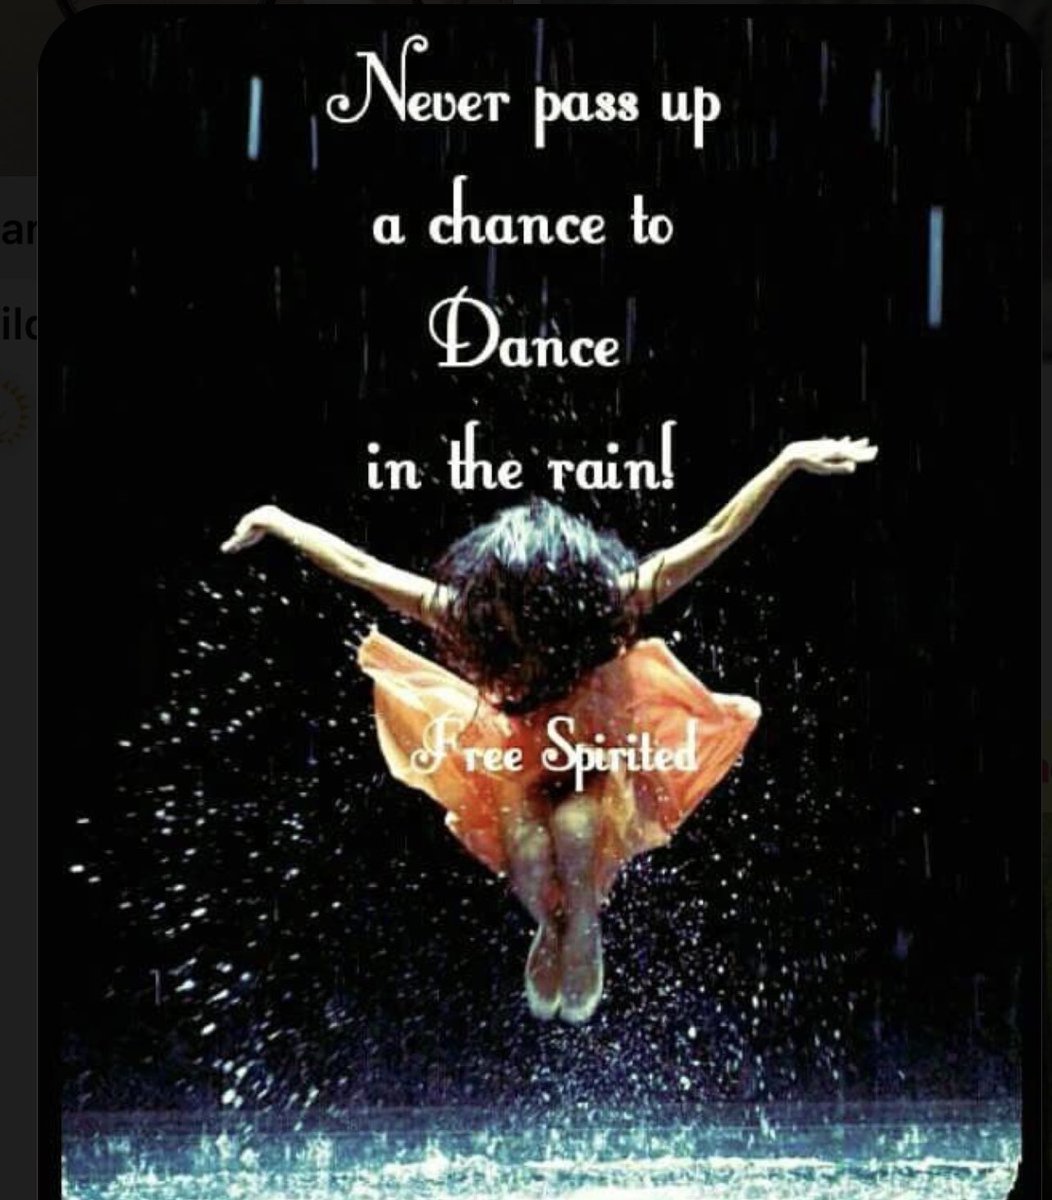 Never pass up a chance to Dance in the Rain. It’s a feeling of pure joy ♥️